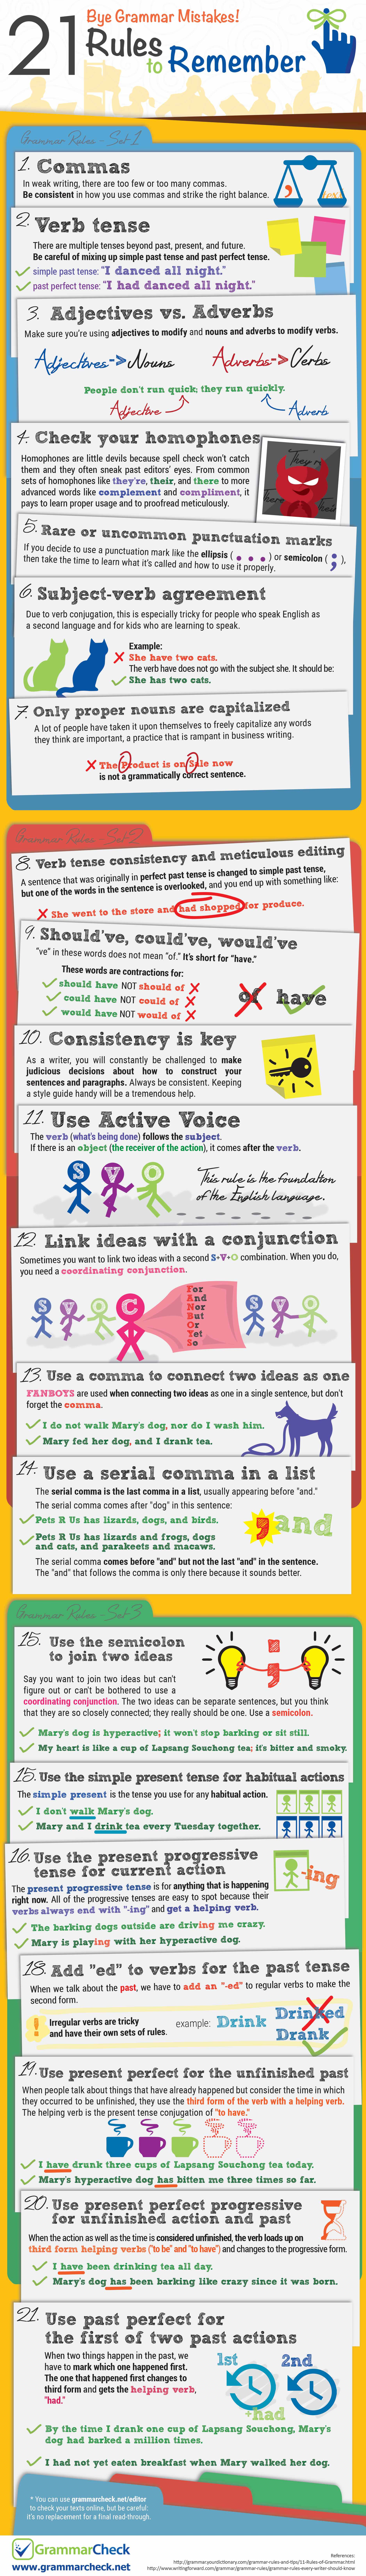 Bye Grammar Mistakes! 21 Rules to Remember (Infographic)